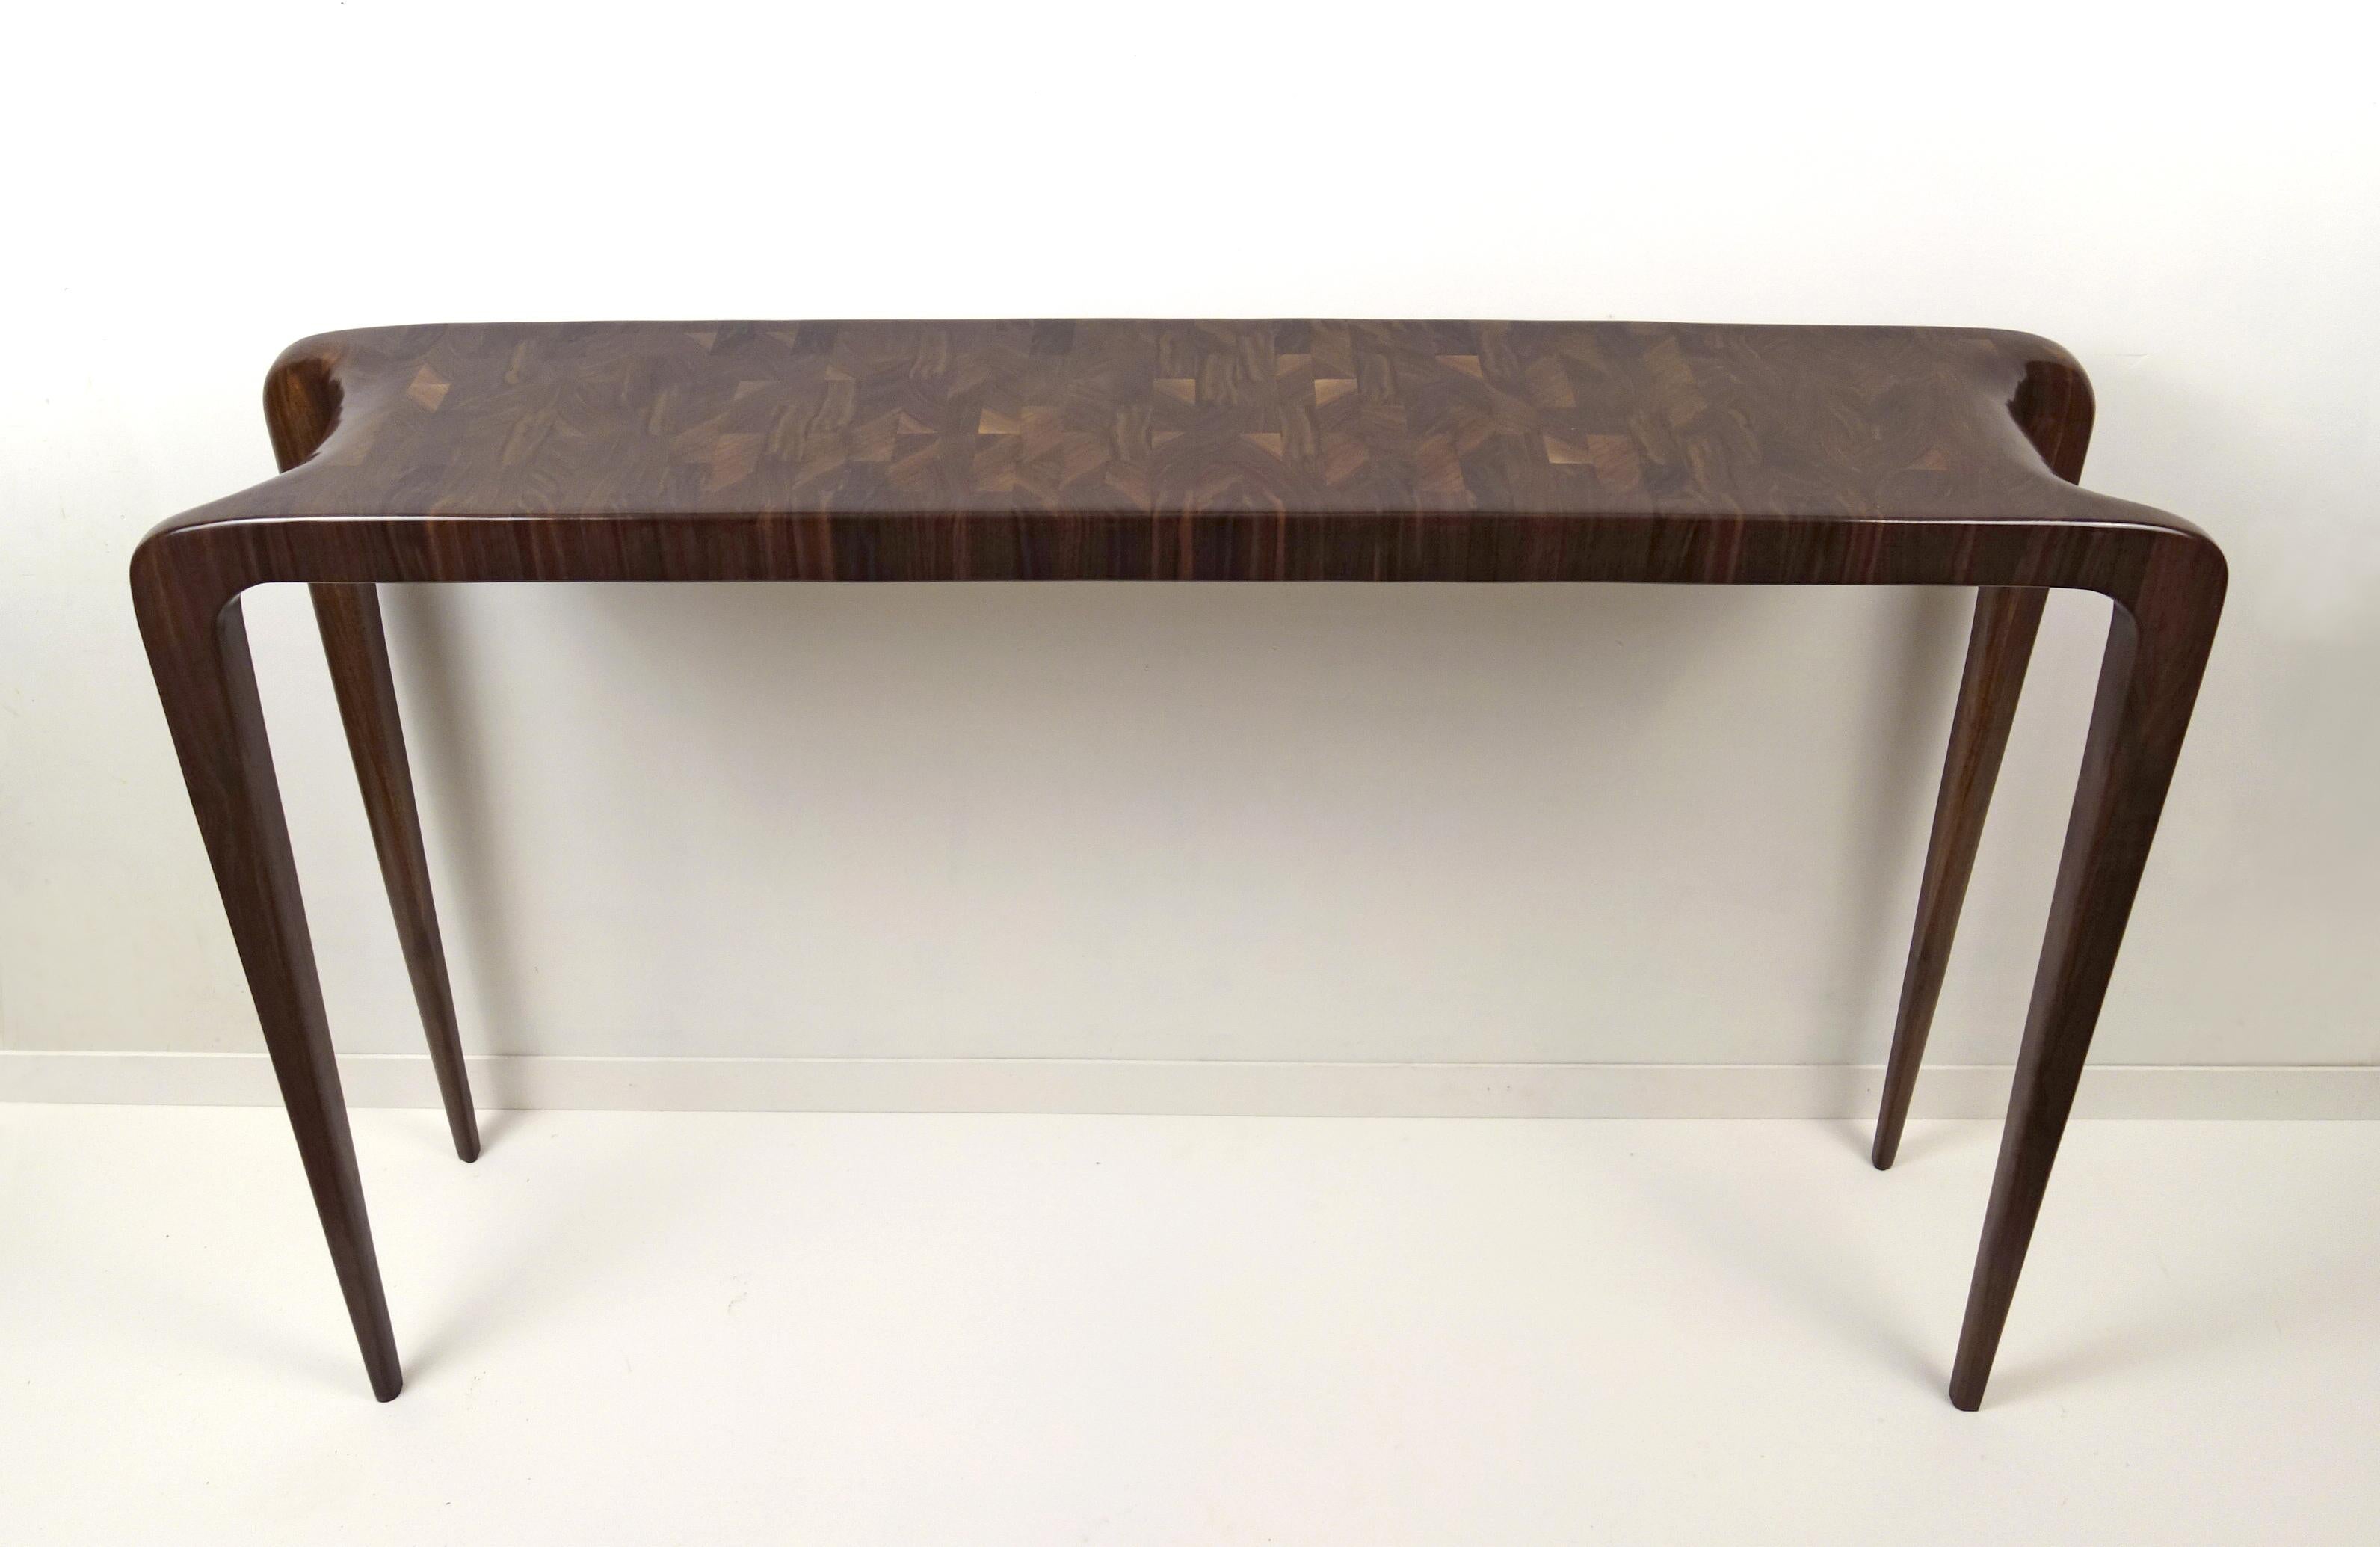 This is a custom Endgrain Console in walnut, dimensions 900mm wide, 280mm deep, 760mm high. Shipping costs include a handling fee of $125 and UPS ground shipping cost of $800 to ship to Kihei, Hawaii. Console will be shipped in a double-walled